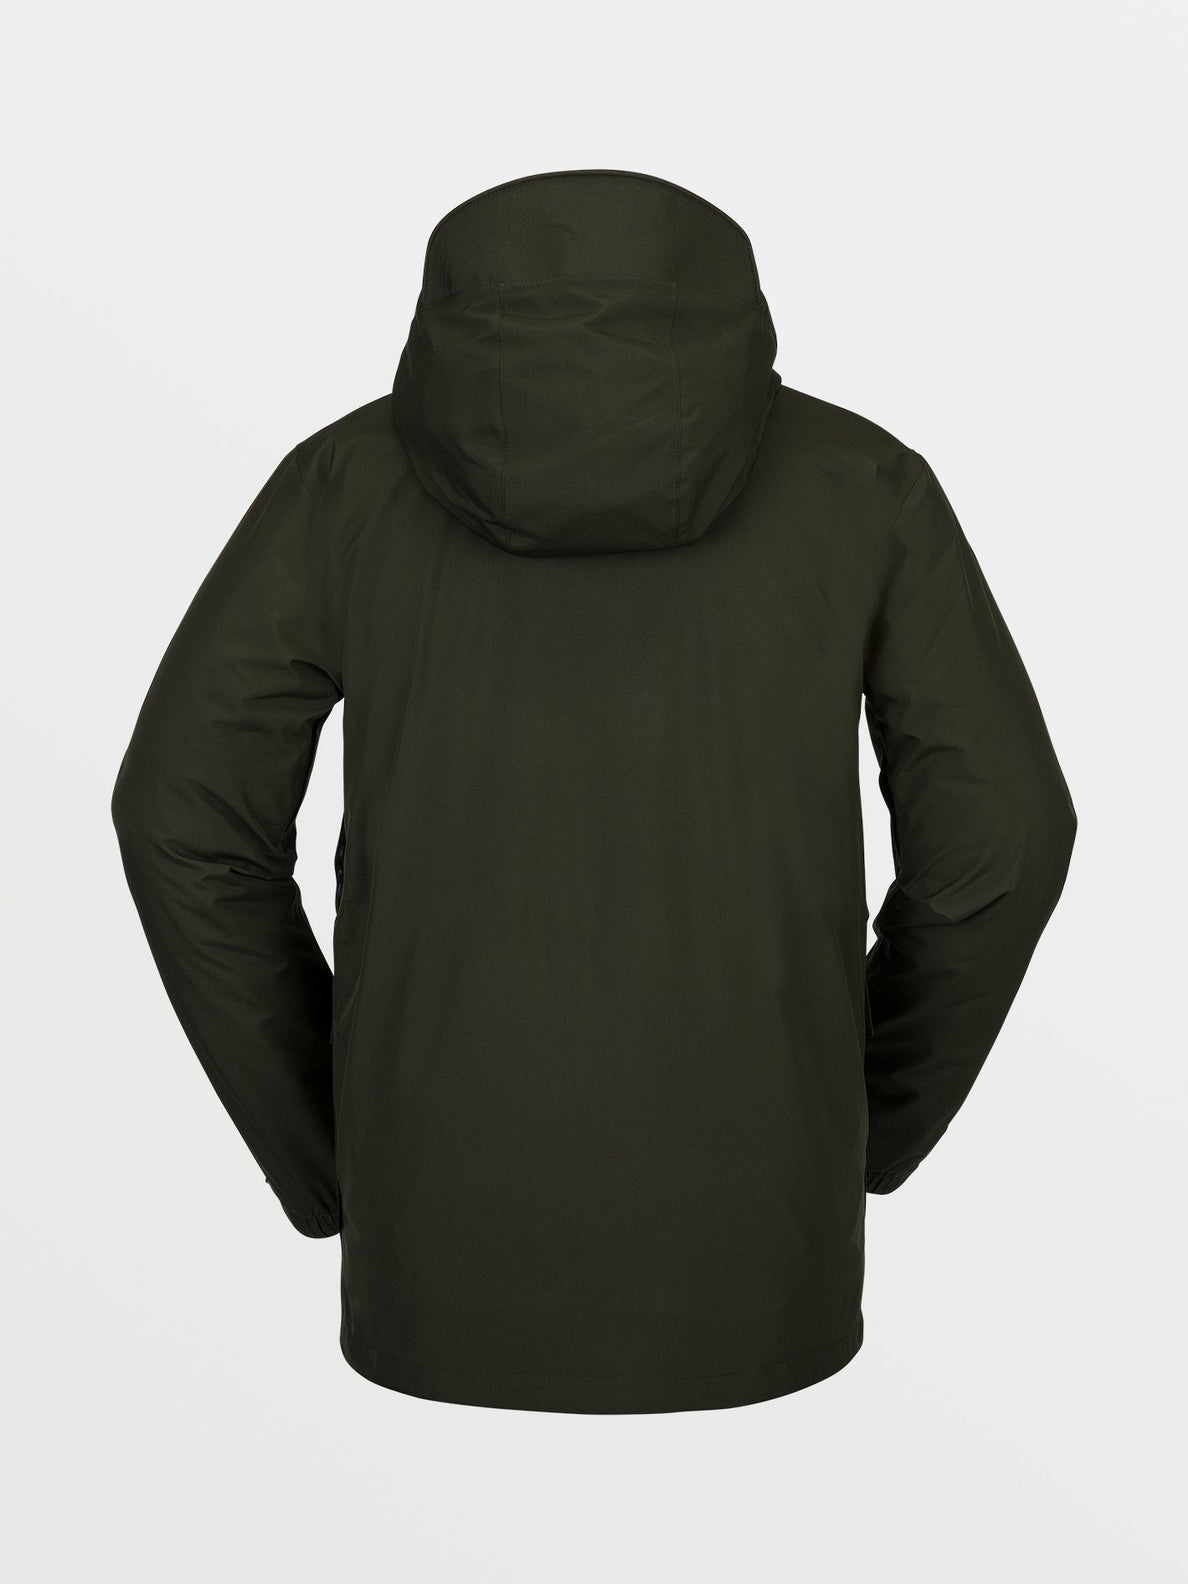 Ten Insulated Gore-Tex Jacket - SATURATED GREEN (G0452204_SAG) [B]